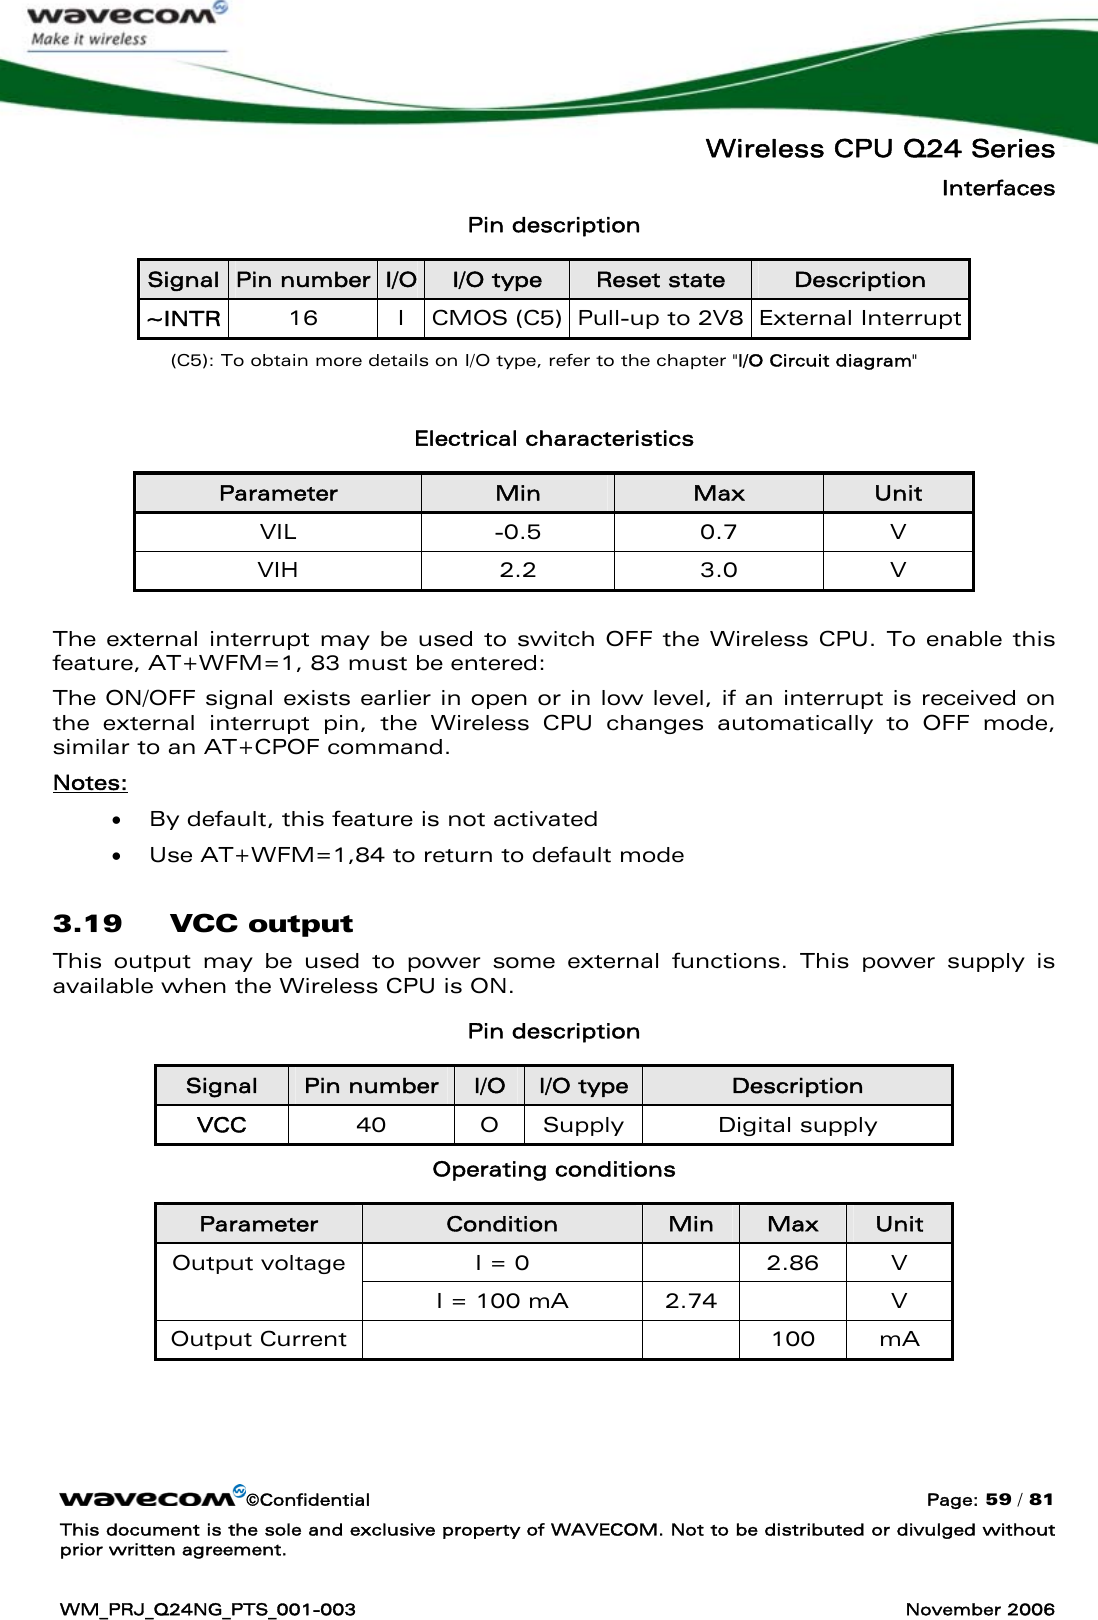   Wireless CPU Q24 Series Interfaces ©Confidential  Page: 59 / 81 This document is the sole and exclusive property of WAVECOM. Not to be distributed or divulged without prior written agreement.  WM_PRJ_Q24NG_PTS_001-003  November 2006  Pin description Signal  Pin number  I/O  I/O type  Reset state  Description ~INTR  16 I CMOS (C5) Pull-up to 2V8 External Interrupt (C5): To obtain more details on I/O type, refer to the chapter &quot;I/O Circuit diagram&quot;  Electrical characteristics Parameter  Min  Max  Unit VIL -0.5 0.7 V VIH 2.2 3.0 V  The external interrupt may be used to switch OFF the Wireless CPU. To enable this feature, AT+WFM=1, 83 must be entered:  The ON/OFF signal exists earlier in open or in low level, if an interrupt is received on the external interrupt pin, the Wireless CPU changes automatically to OFF mode, similar to an AT+CPOF command. Notes:  • By default, this feature is not activated • Use AT+WFM=1,84 to return to default mode 3.19 VCC output This output may be used to power some external functions. This power supply is available when the Wireless CPU is ON. Pin description Signal  Pin number  I/O  I/O type  Description VCC  40 O Supply Digital supply Operating conditions Parameter  Condition  Min  Max  Unit I = 0    2.86  V Output voltage I = 100 mA  2.74    V Output Current       100  mA 